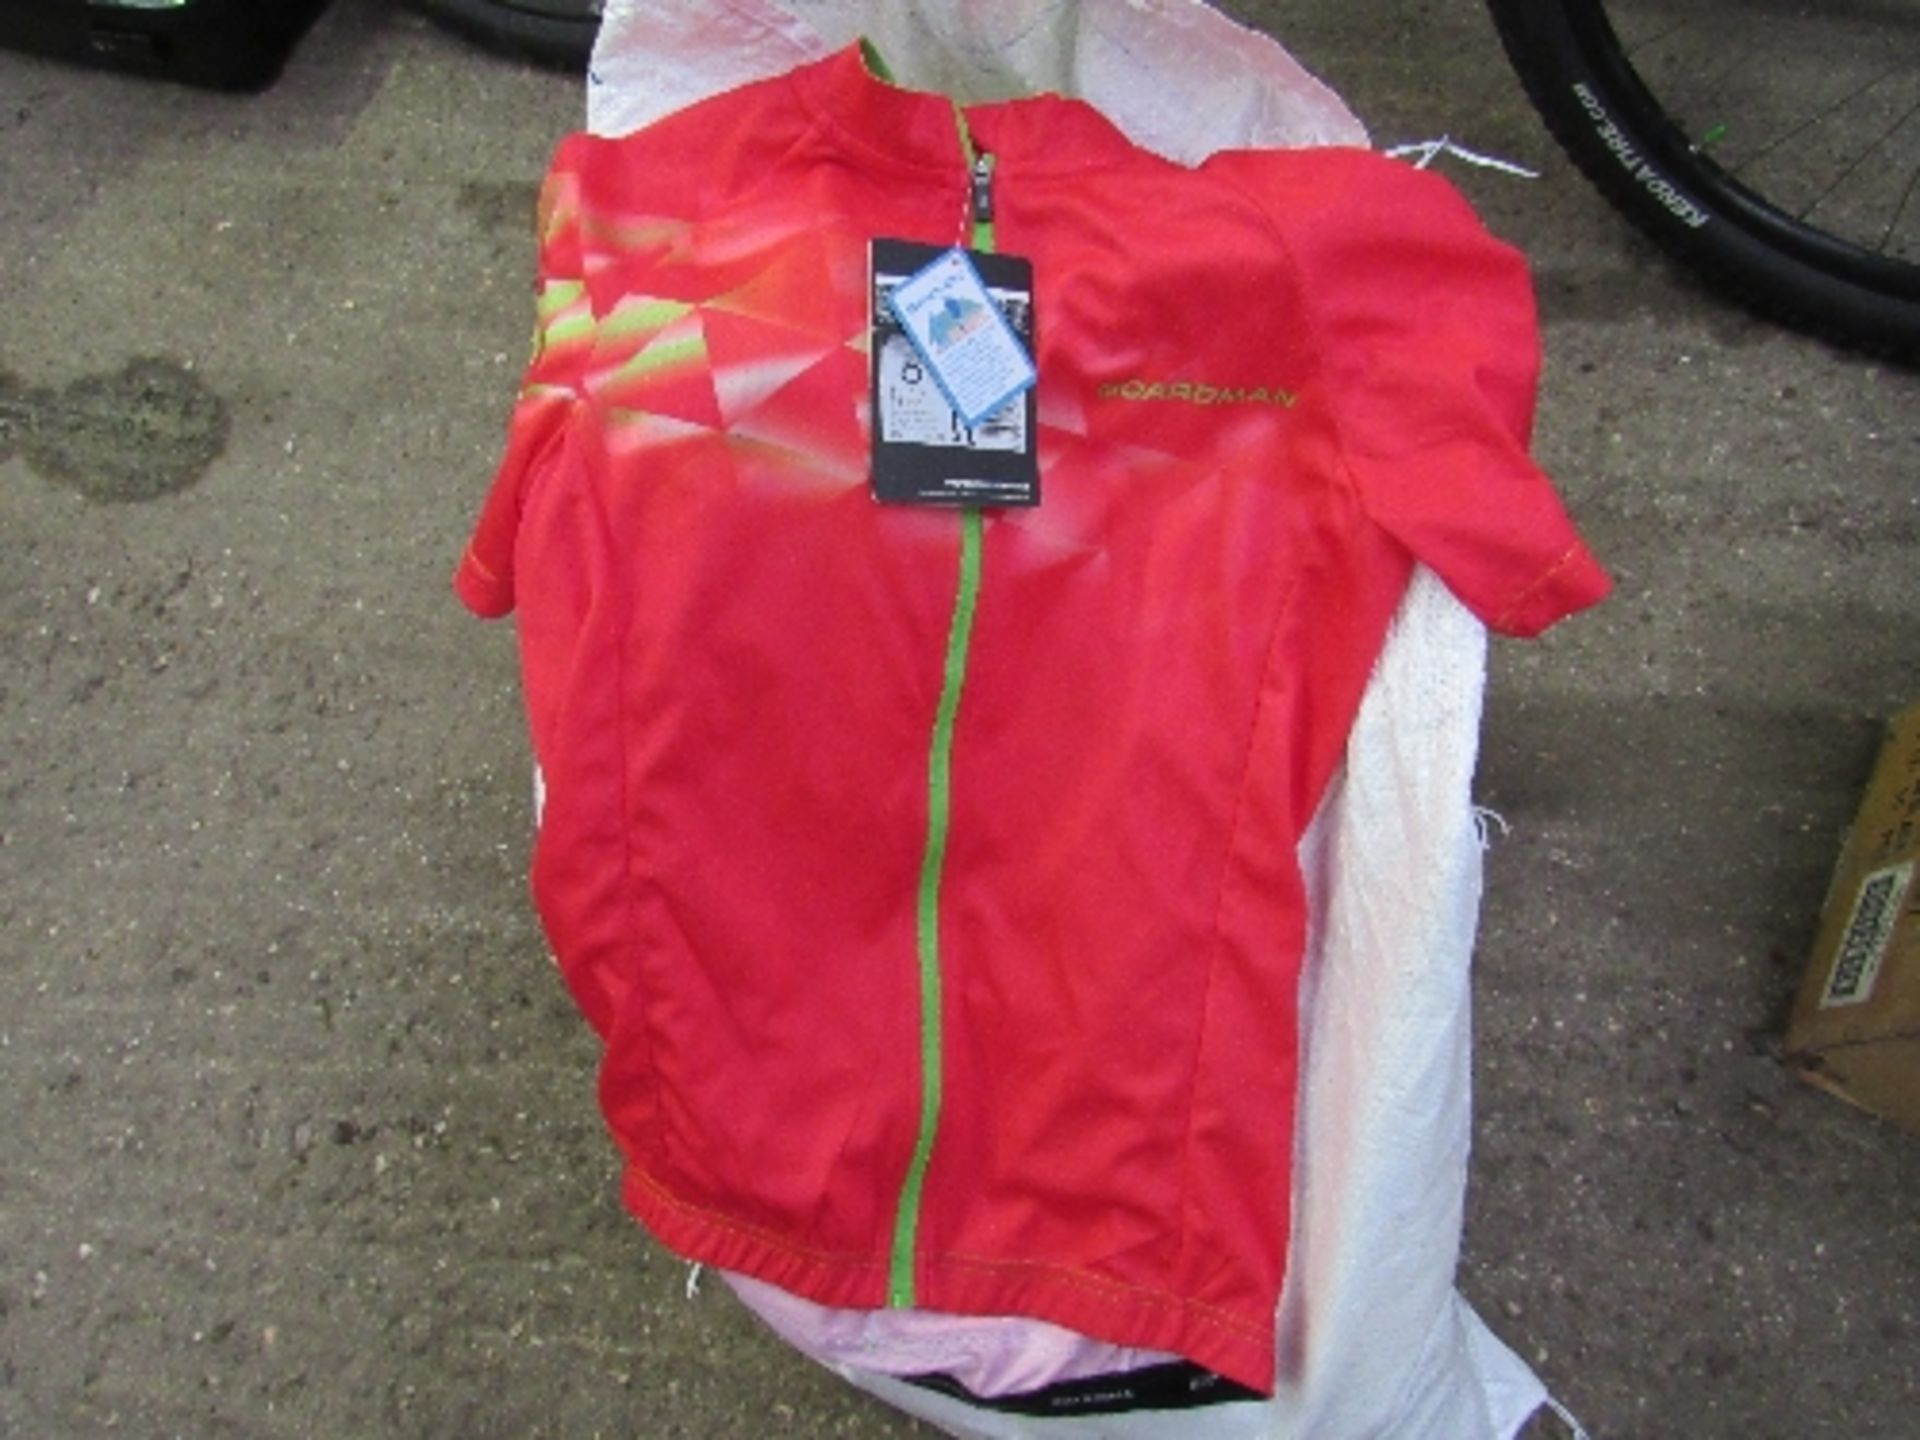 2 bags of new bike clothing - Image 2 of 2